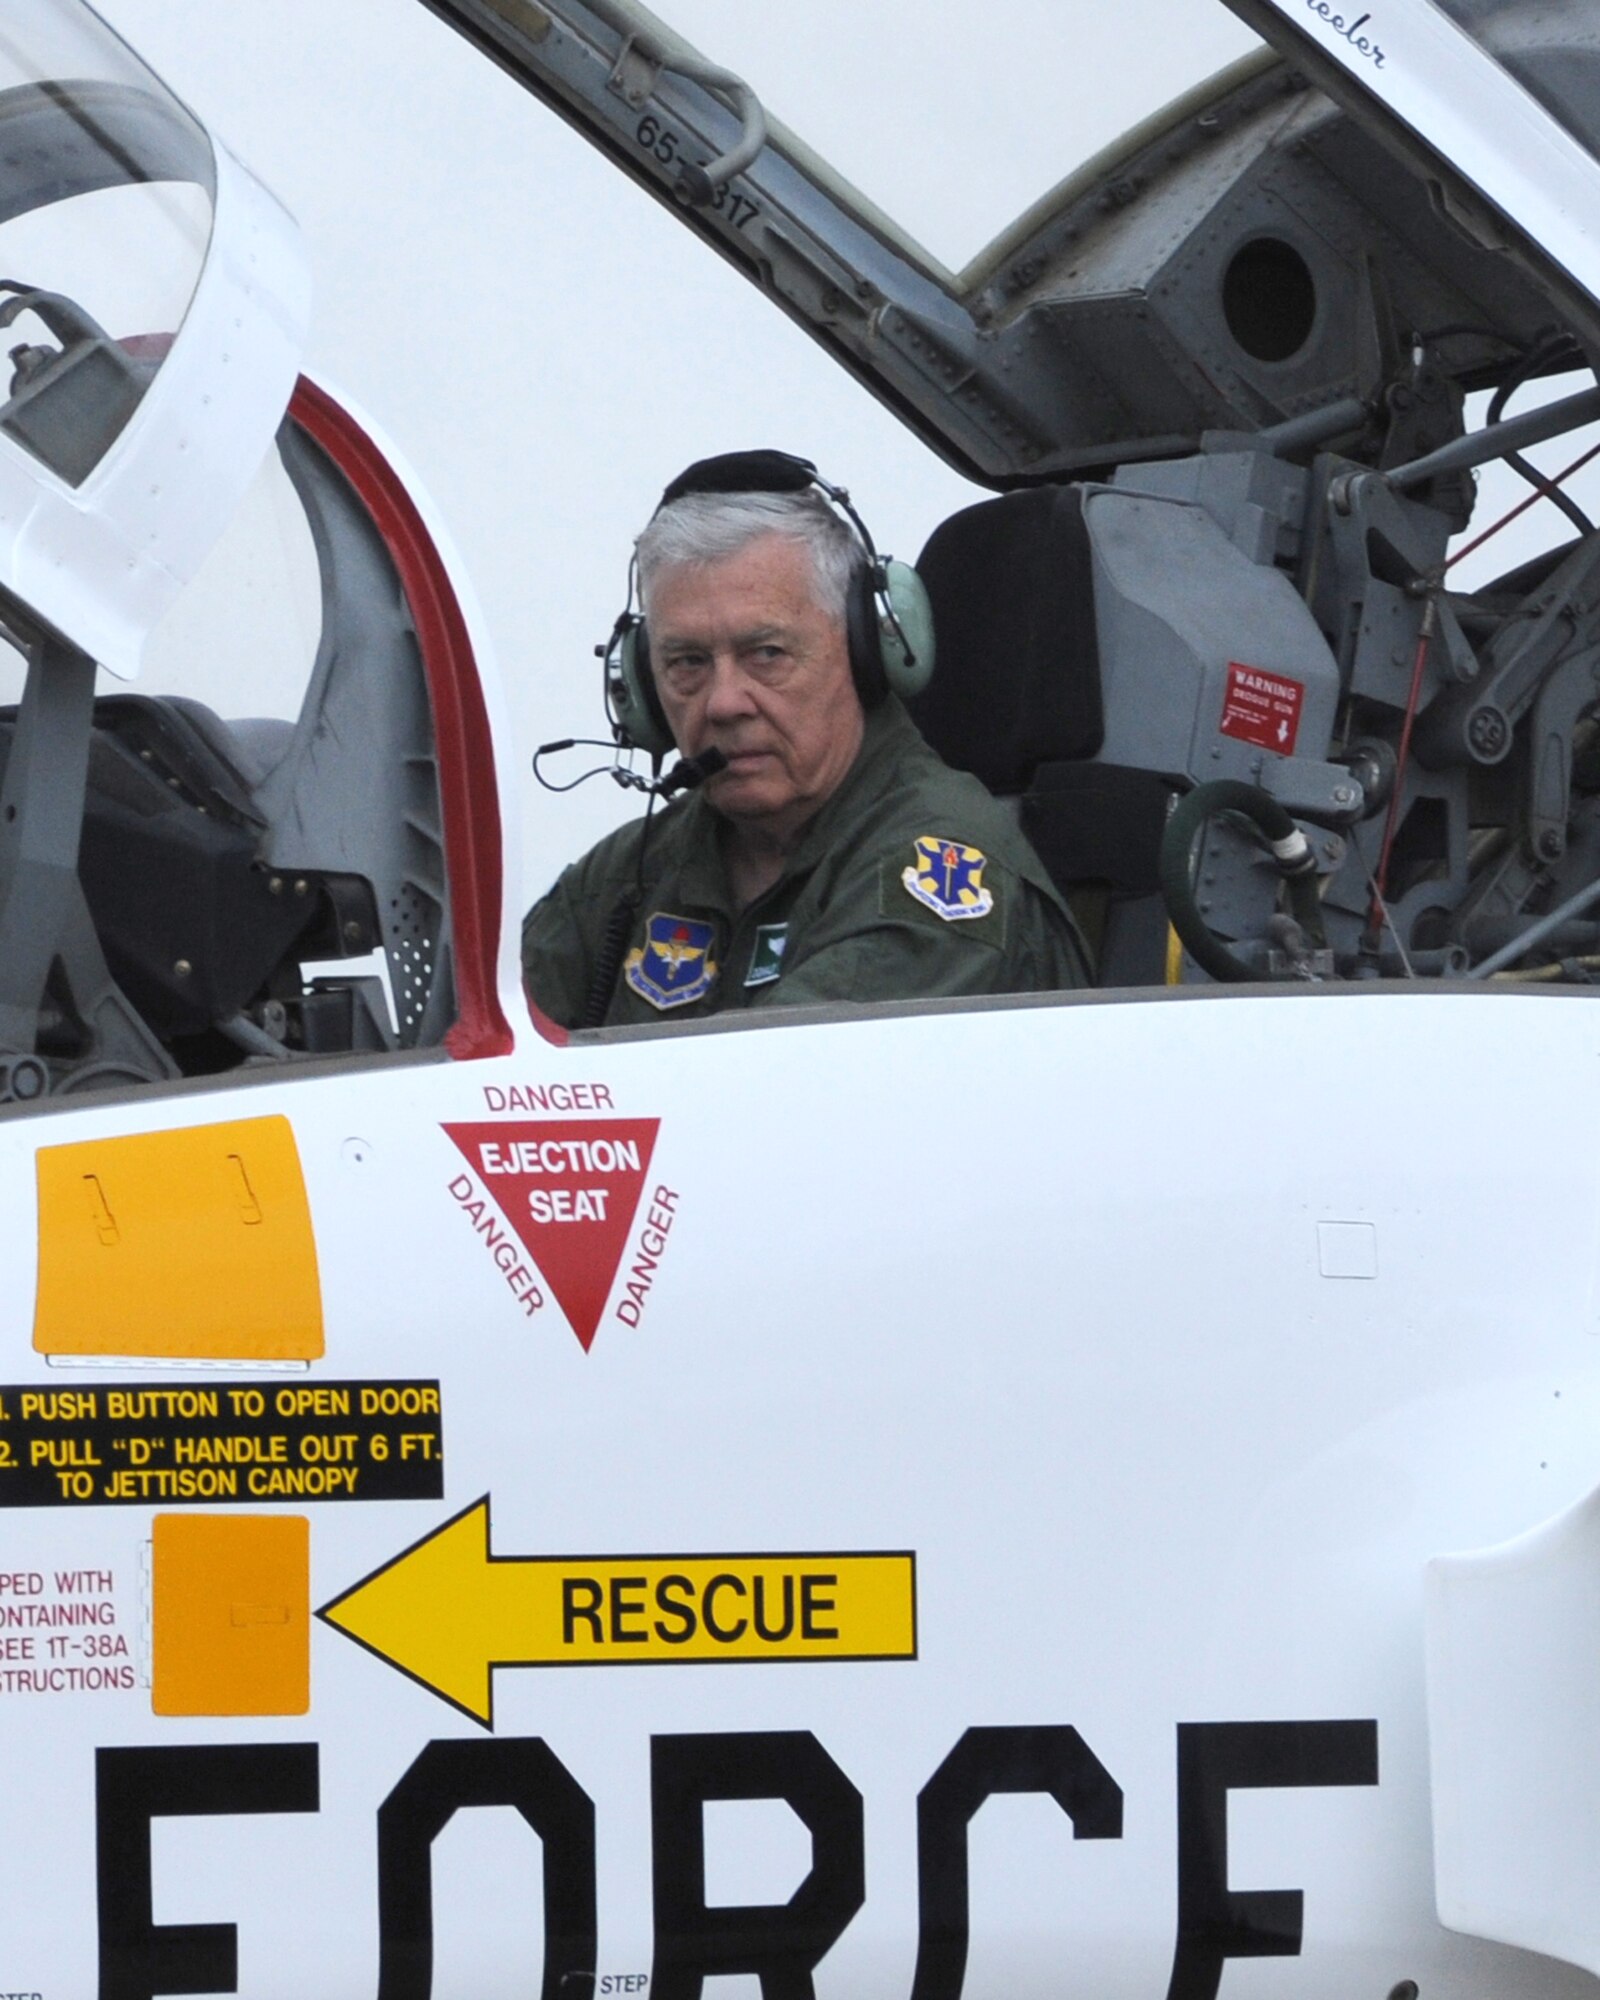 Retired Lt. Col. Donald Wheeler, a member of the first class to train in the T-38, flew the backseater position of the T-38 anniversary plane at Randolph March 17. The ceremony commemorated  the 50th anniversary of the arrival of the T-38 at Randolph. Originally nicknamed the white rocket, the T-38 became the Air Force's first supersonic jet trainer. The aircraft is used to prepare Air Force pilots for front-line fighter and bomber aircraft such as the F-15E Strike Eagle, B-1B Lancer and F-22 Raptor. The Talon has flown more than 13 million hours and has seen more than 70,000 U.S. Airmen trained.  (U.S. Air Force photo/Rich McFadden)